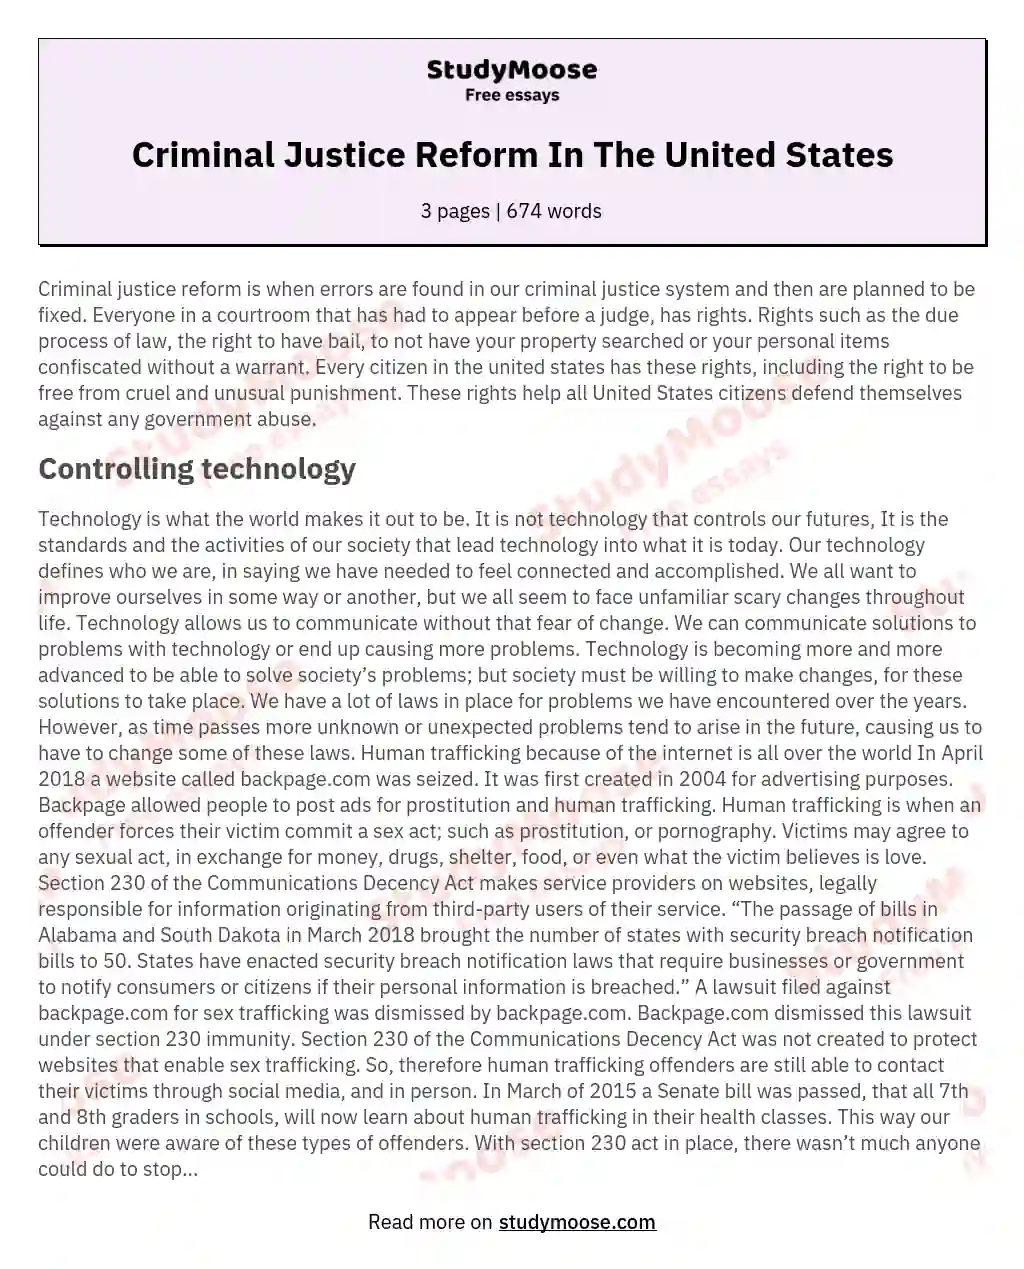 Criminal Justice Reform In The United States essay